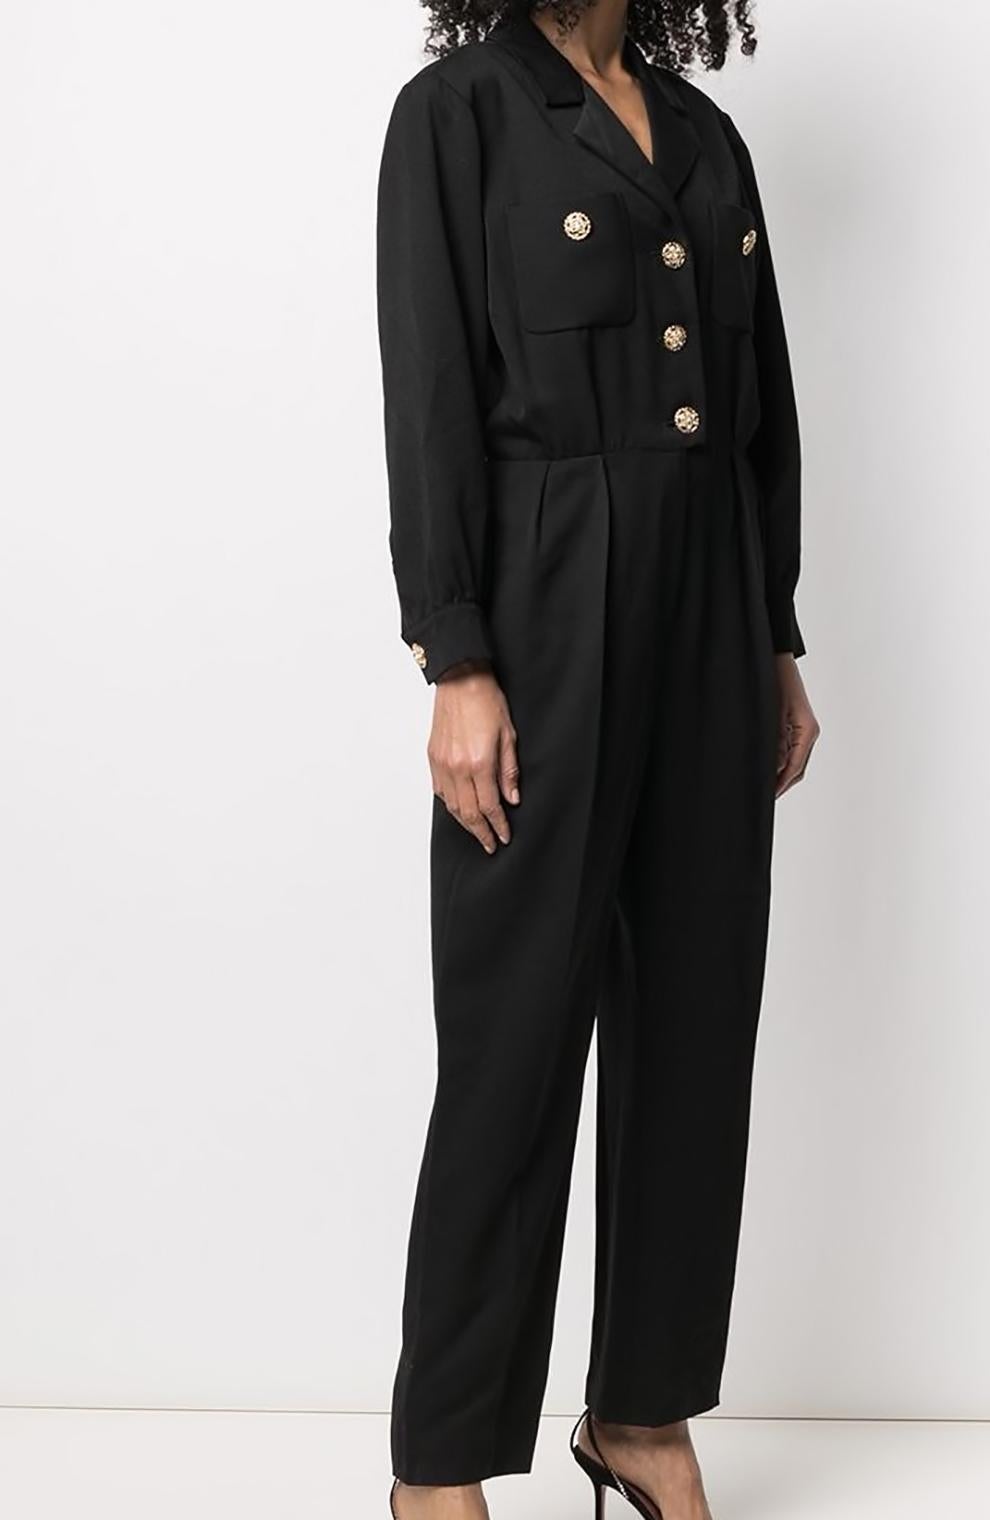 1994 Yves Saint Laurent YSL black evening jumpsuit featuring front jewel buttons, sides pockets, front patch pockets, shoulder pads.
100% Wool
Estimated size 40fr/US8/UK12 
In good vintage condition. 
Made in France. 
We guarantee you will receive